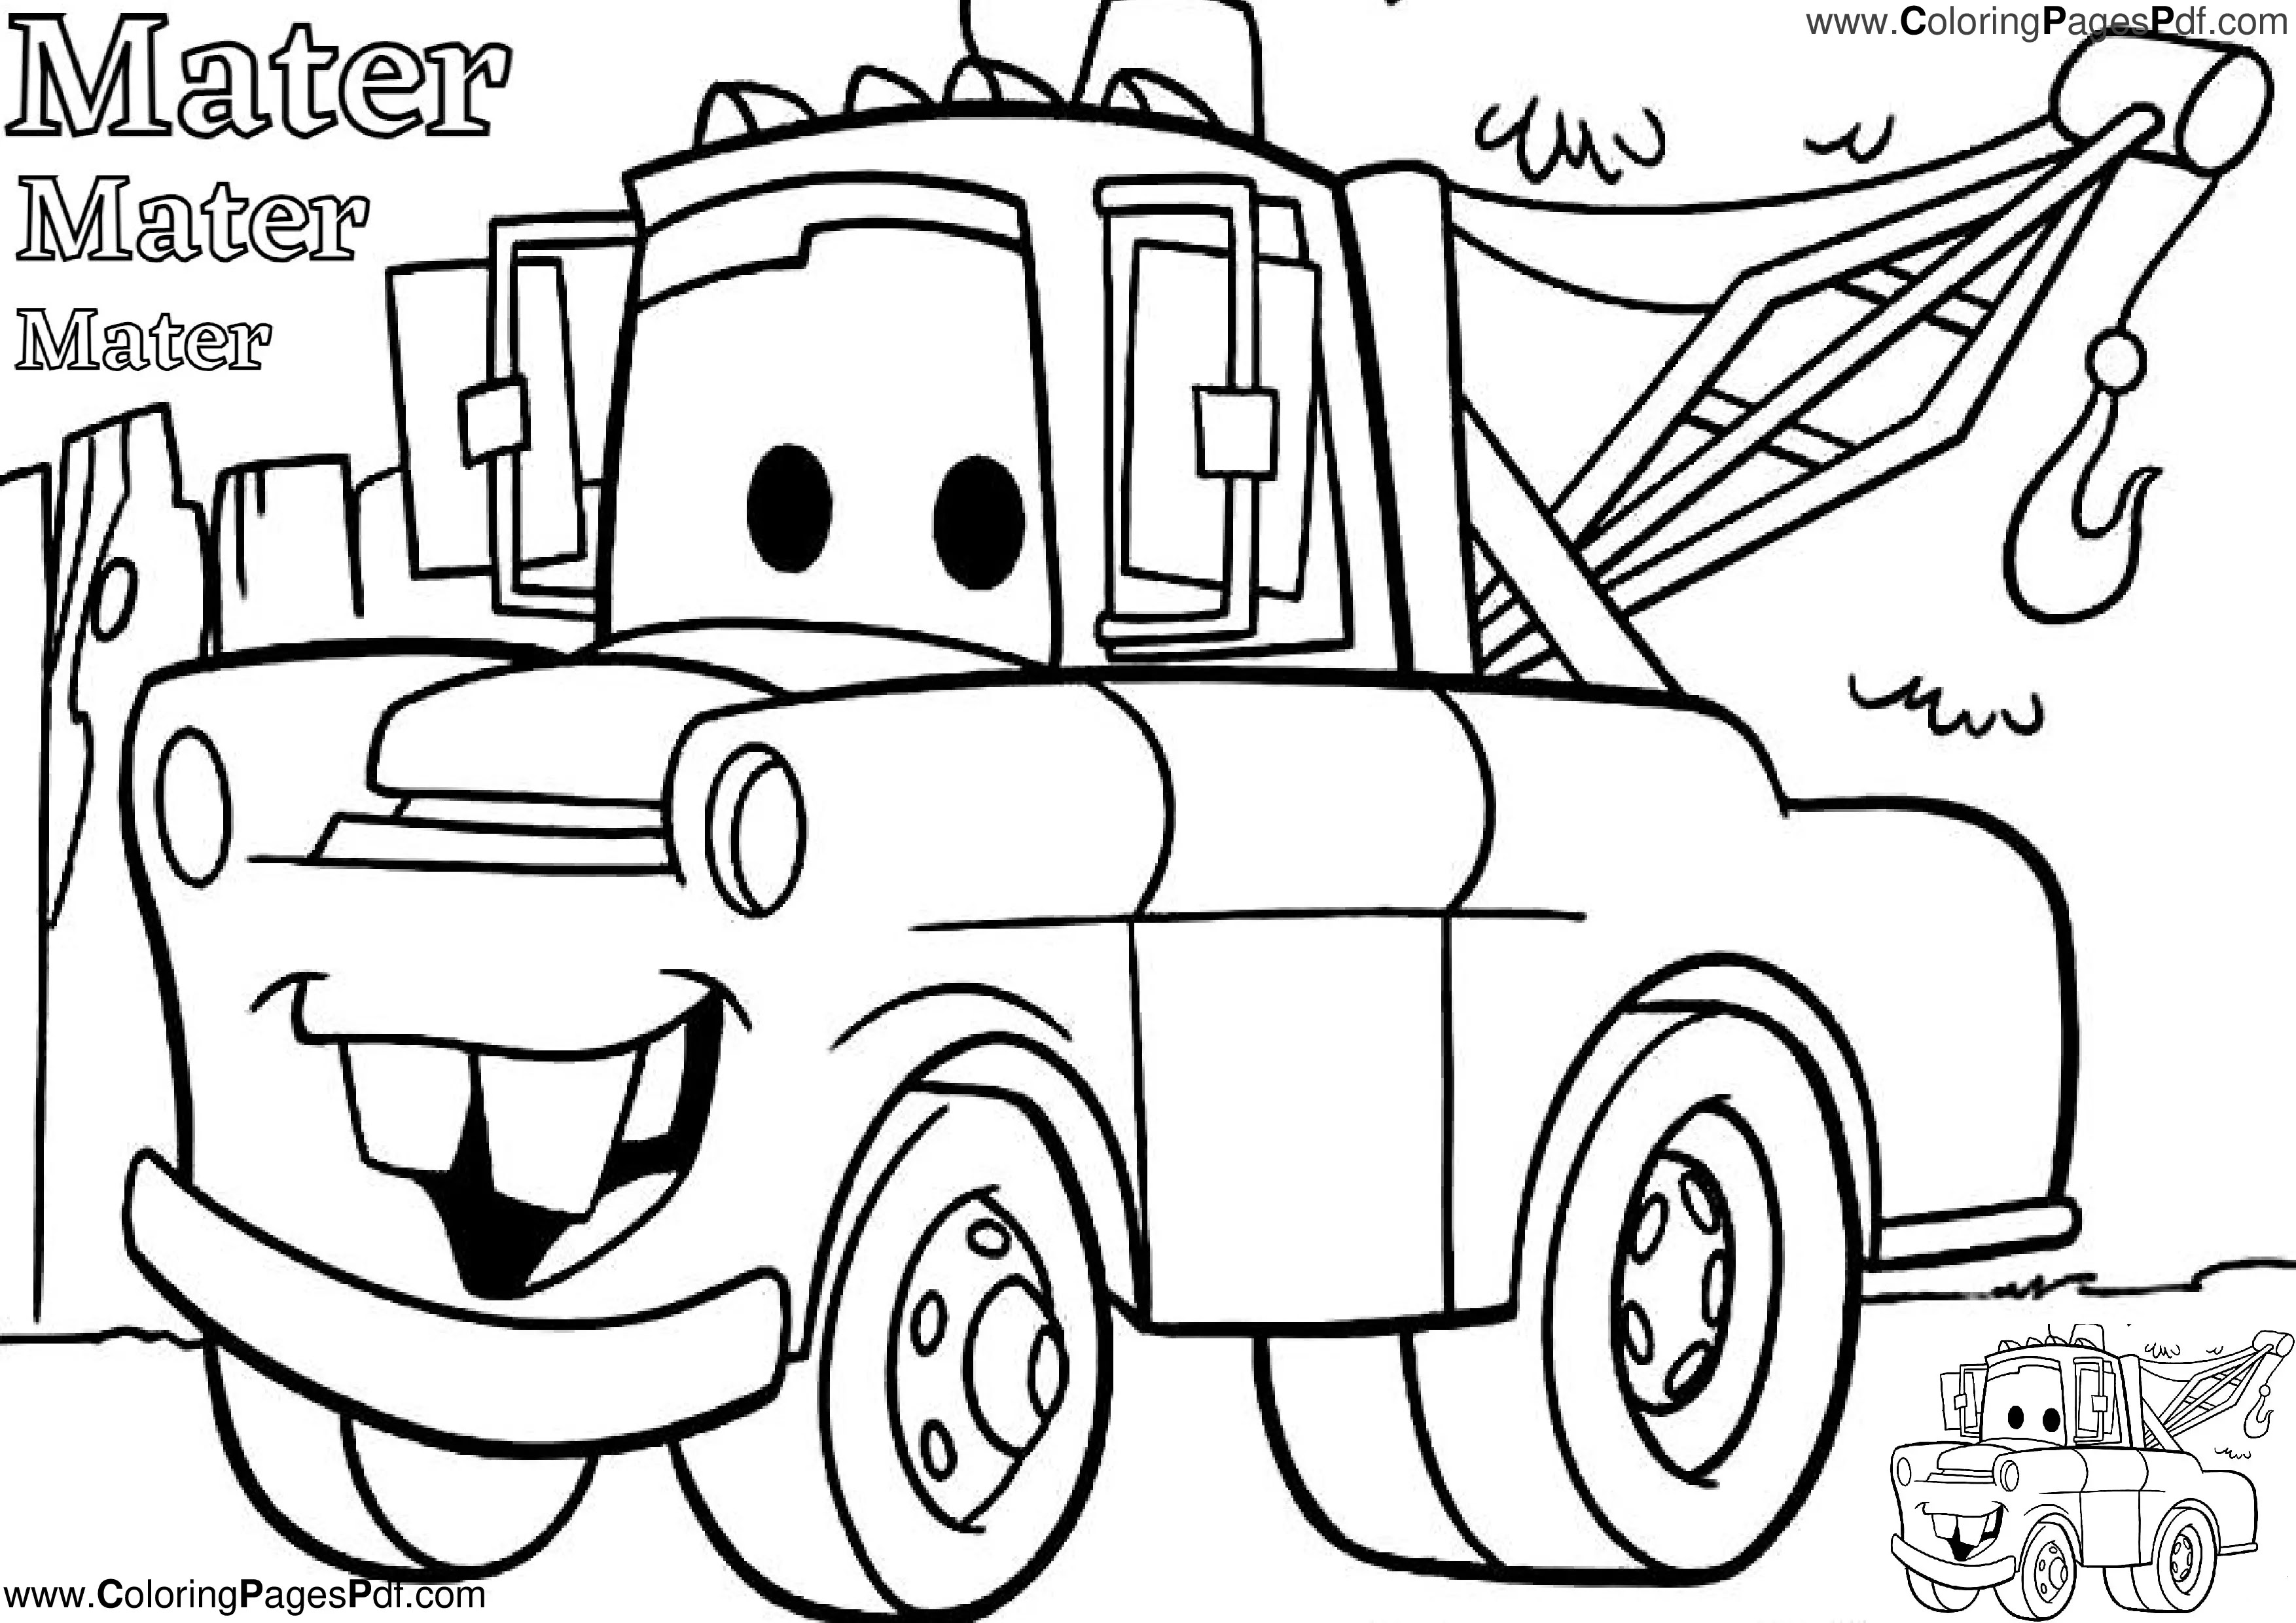 Mater coloring page